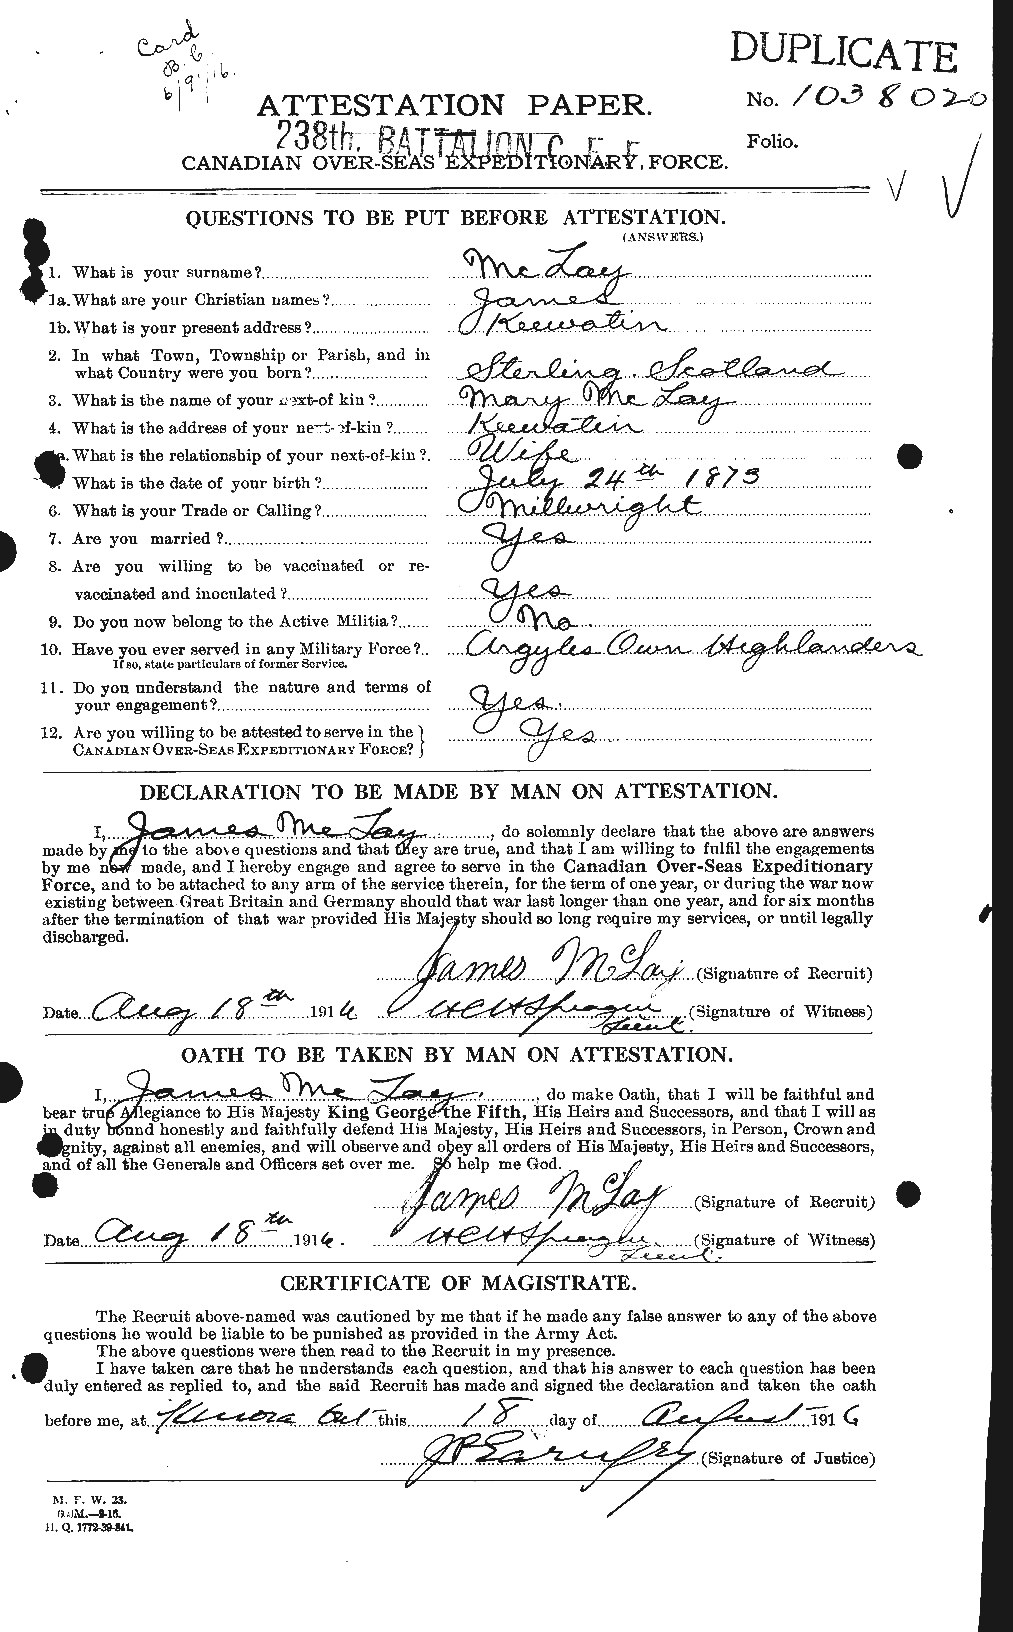 Personnel Records of the First World War - CEF 532672a